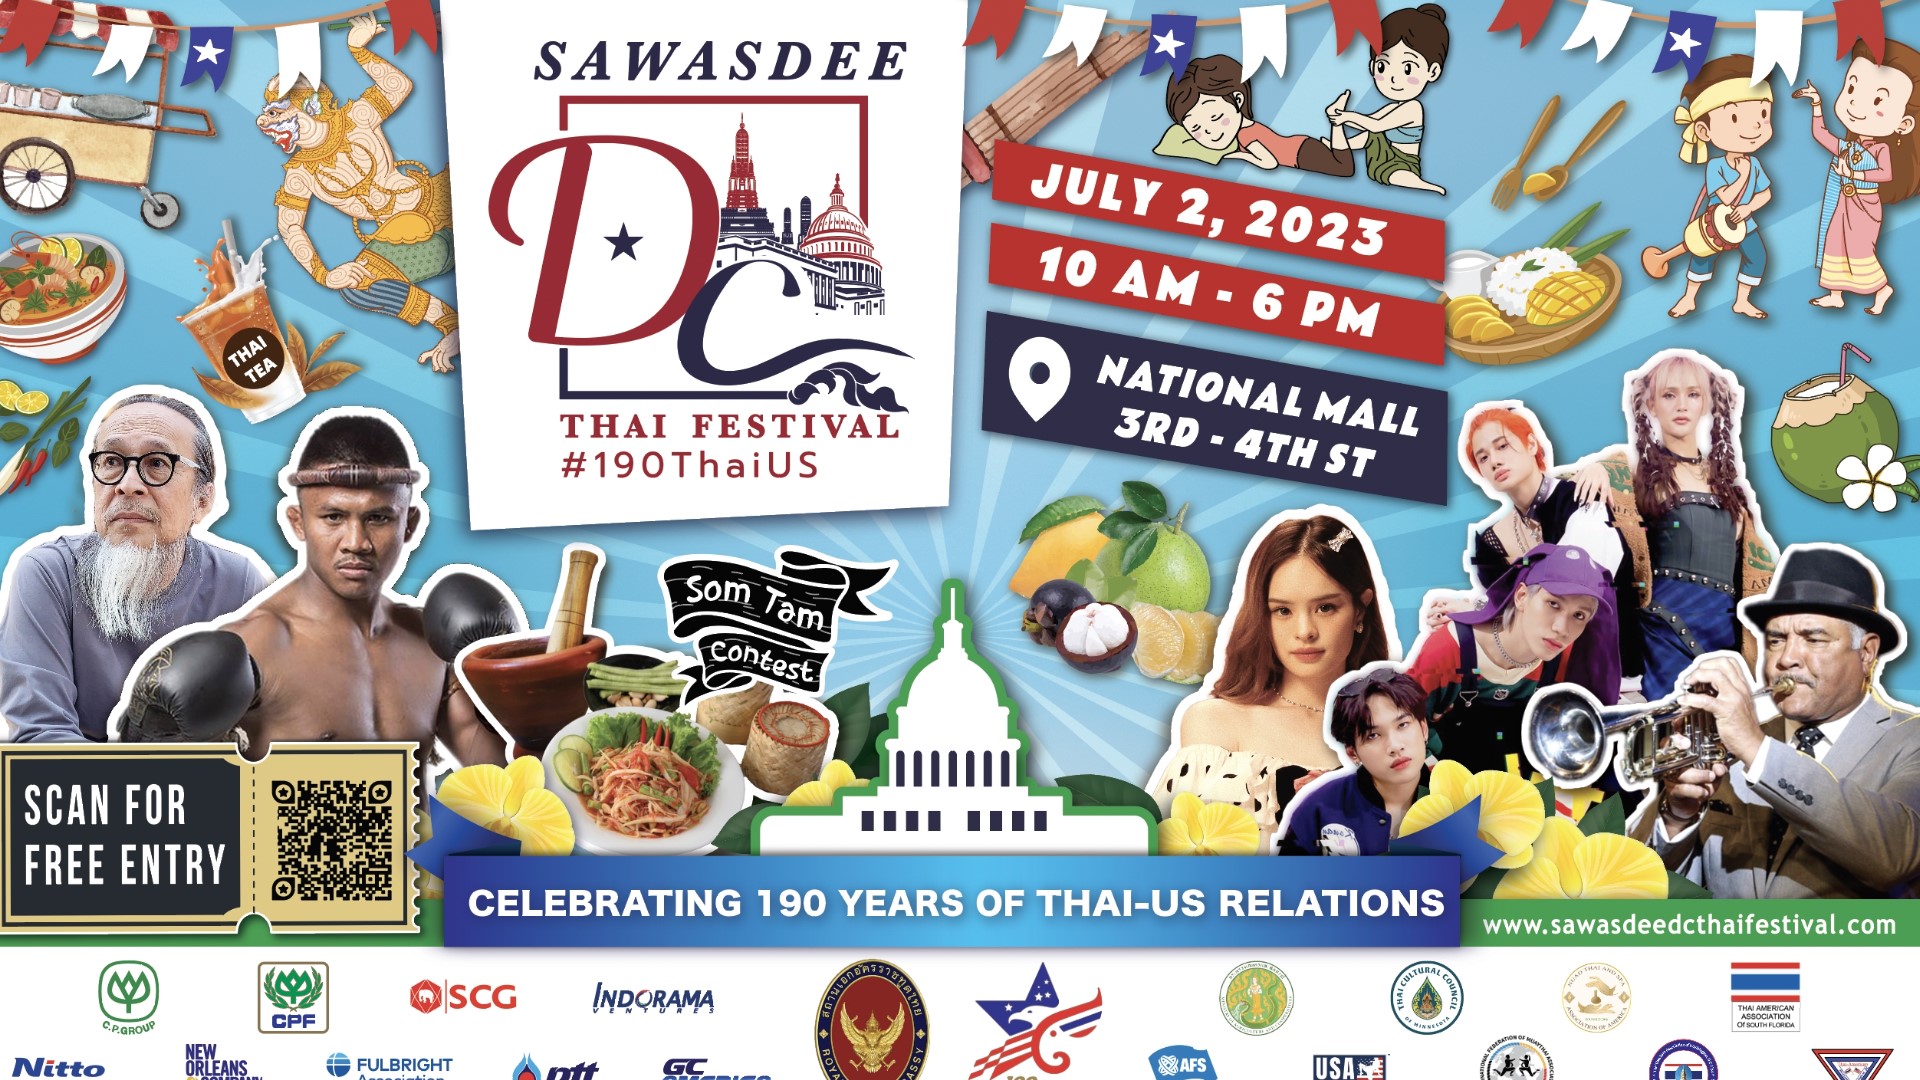 A preview of the Sawasdee DC Thai Festival 2023